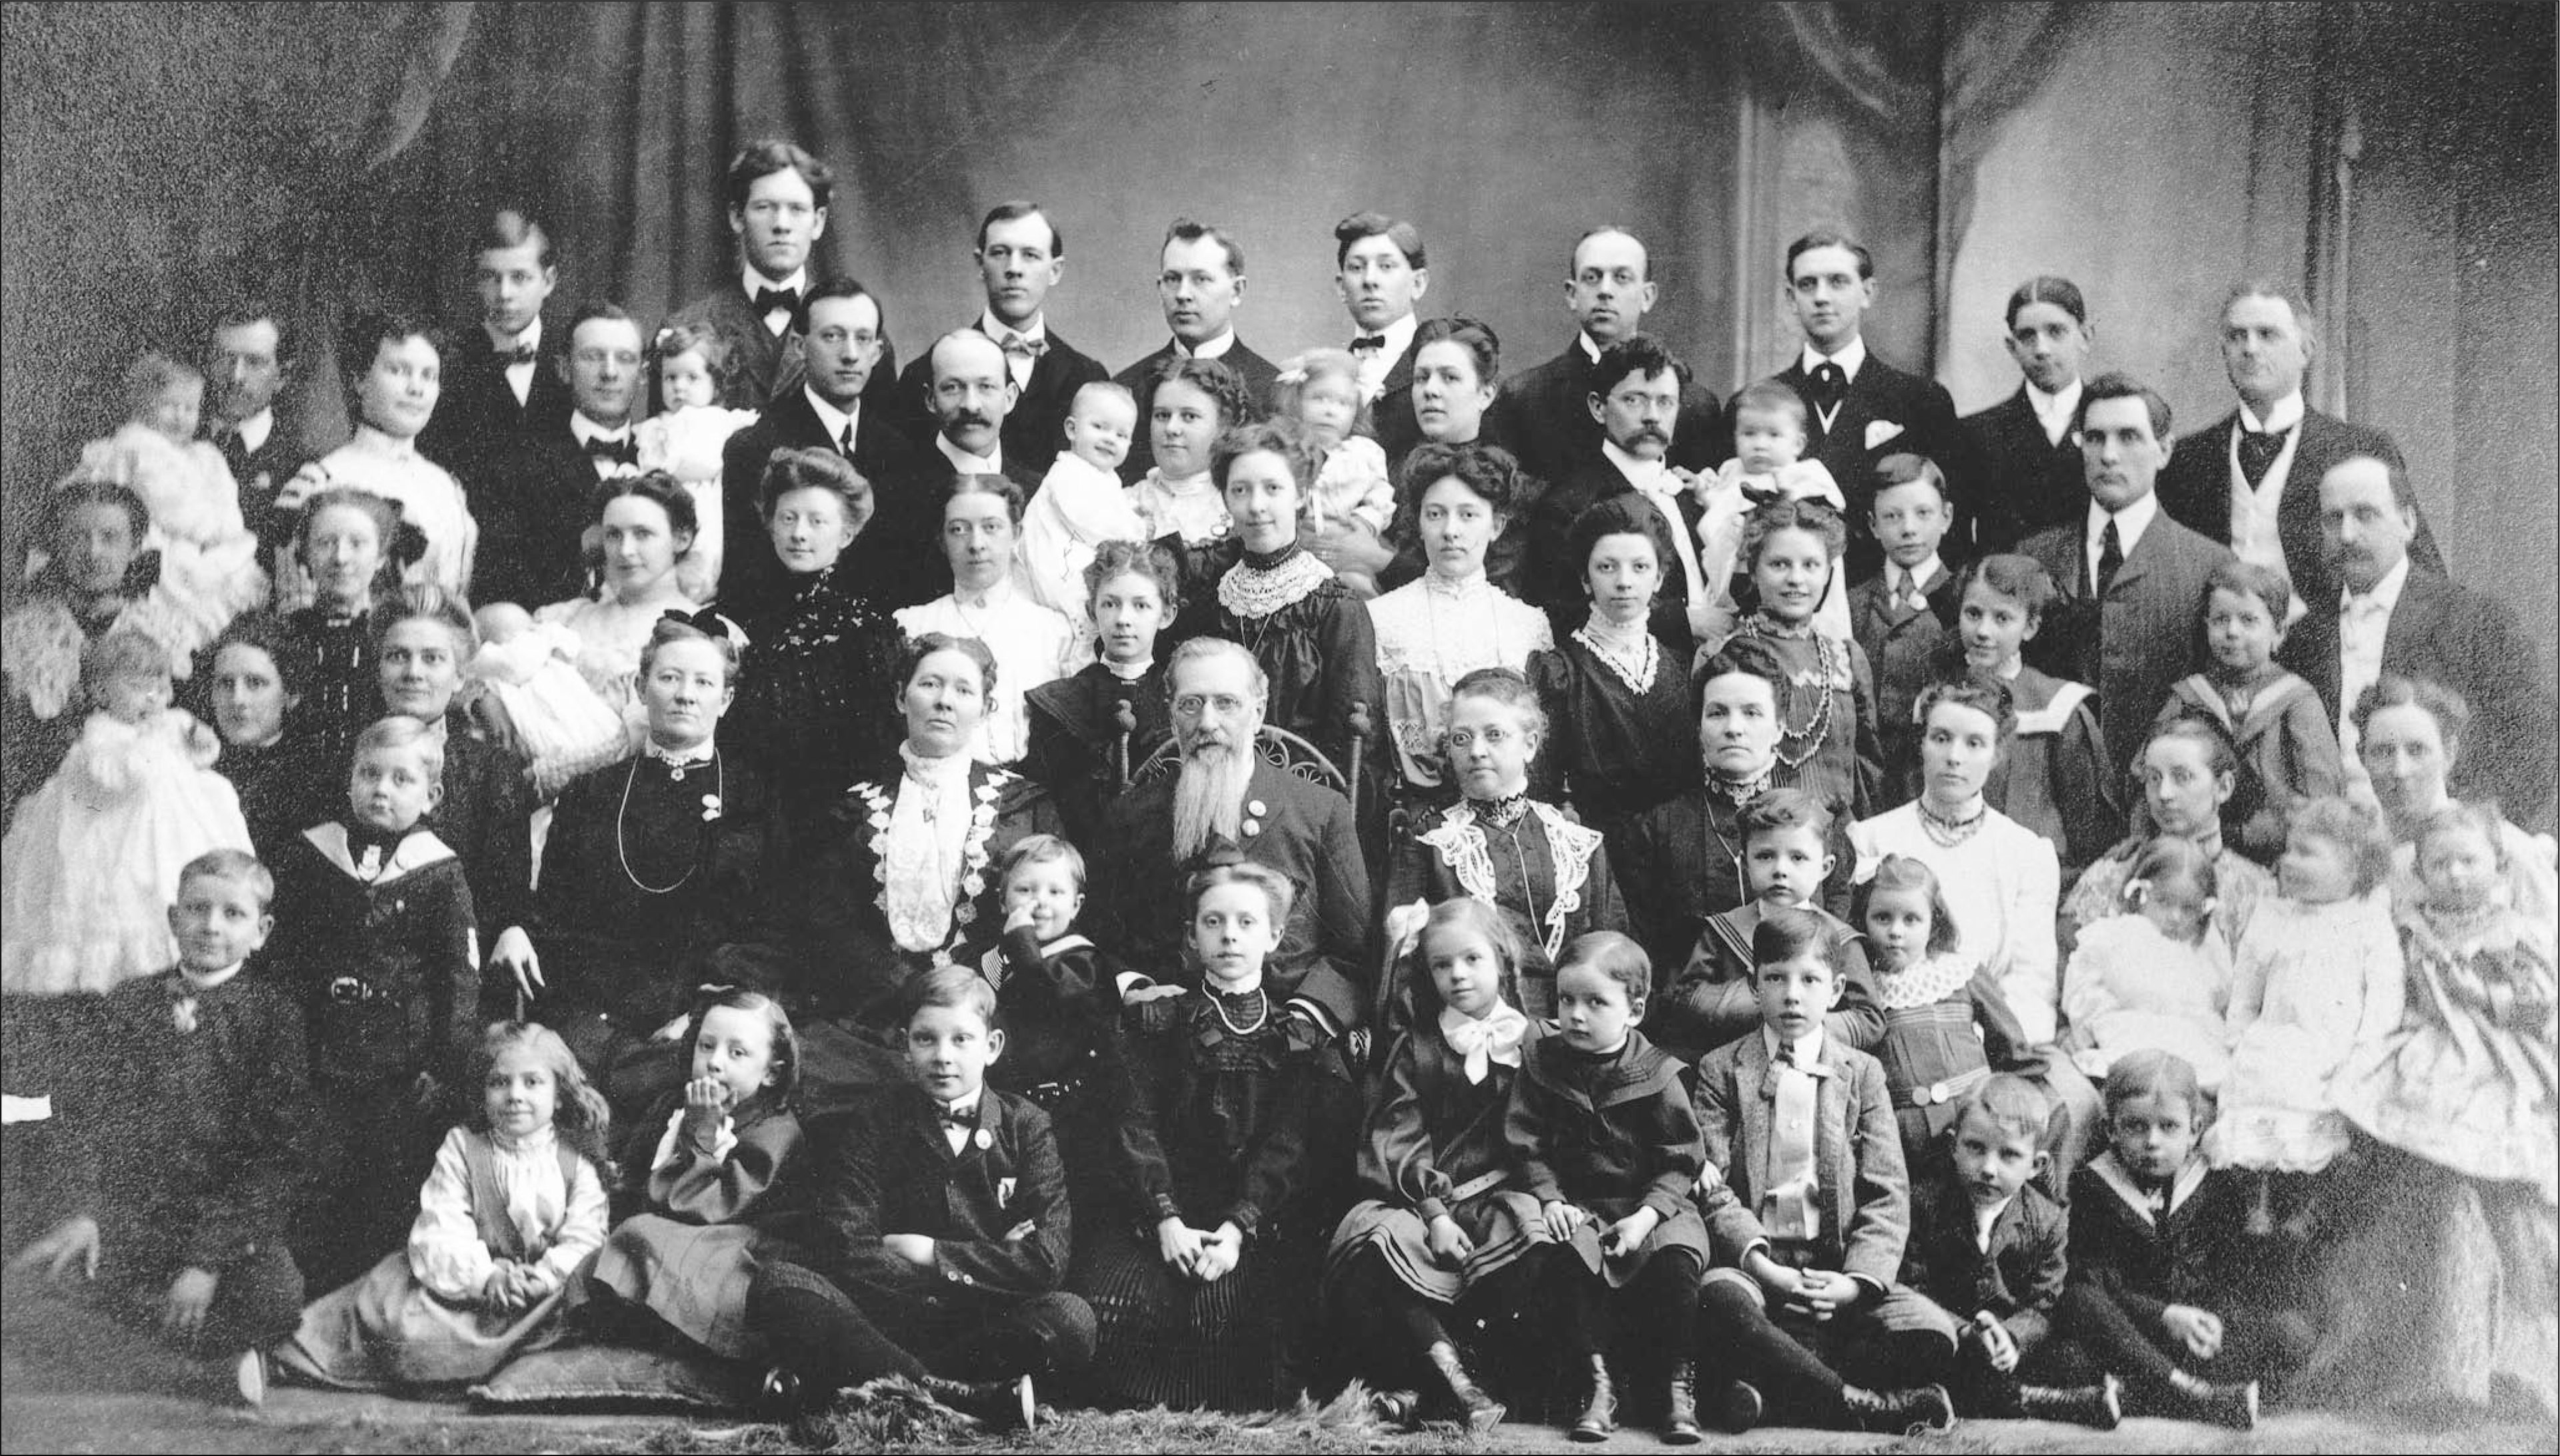 Family photograph of Joseph F. Smith, his five wives, and most of their children taken in 1904. Middle row, from left to right: Mary Taylor Schwartz, Edna Lambson, Julina Lambson, Joseph F. Smith, Sarah Ellen Richards, and Alice Ann Kimball.